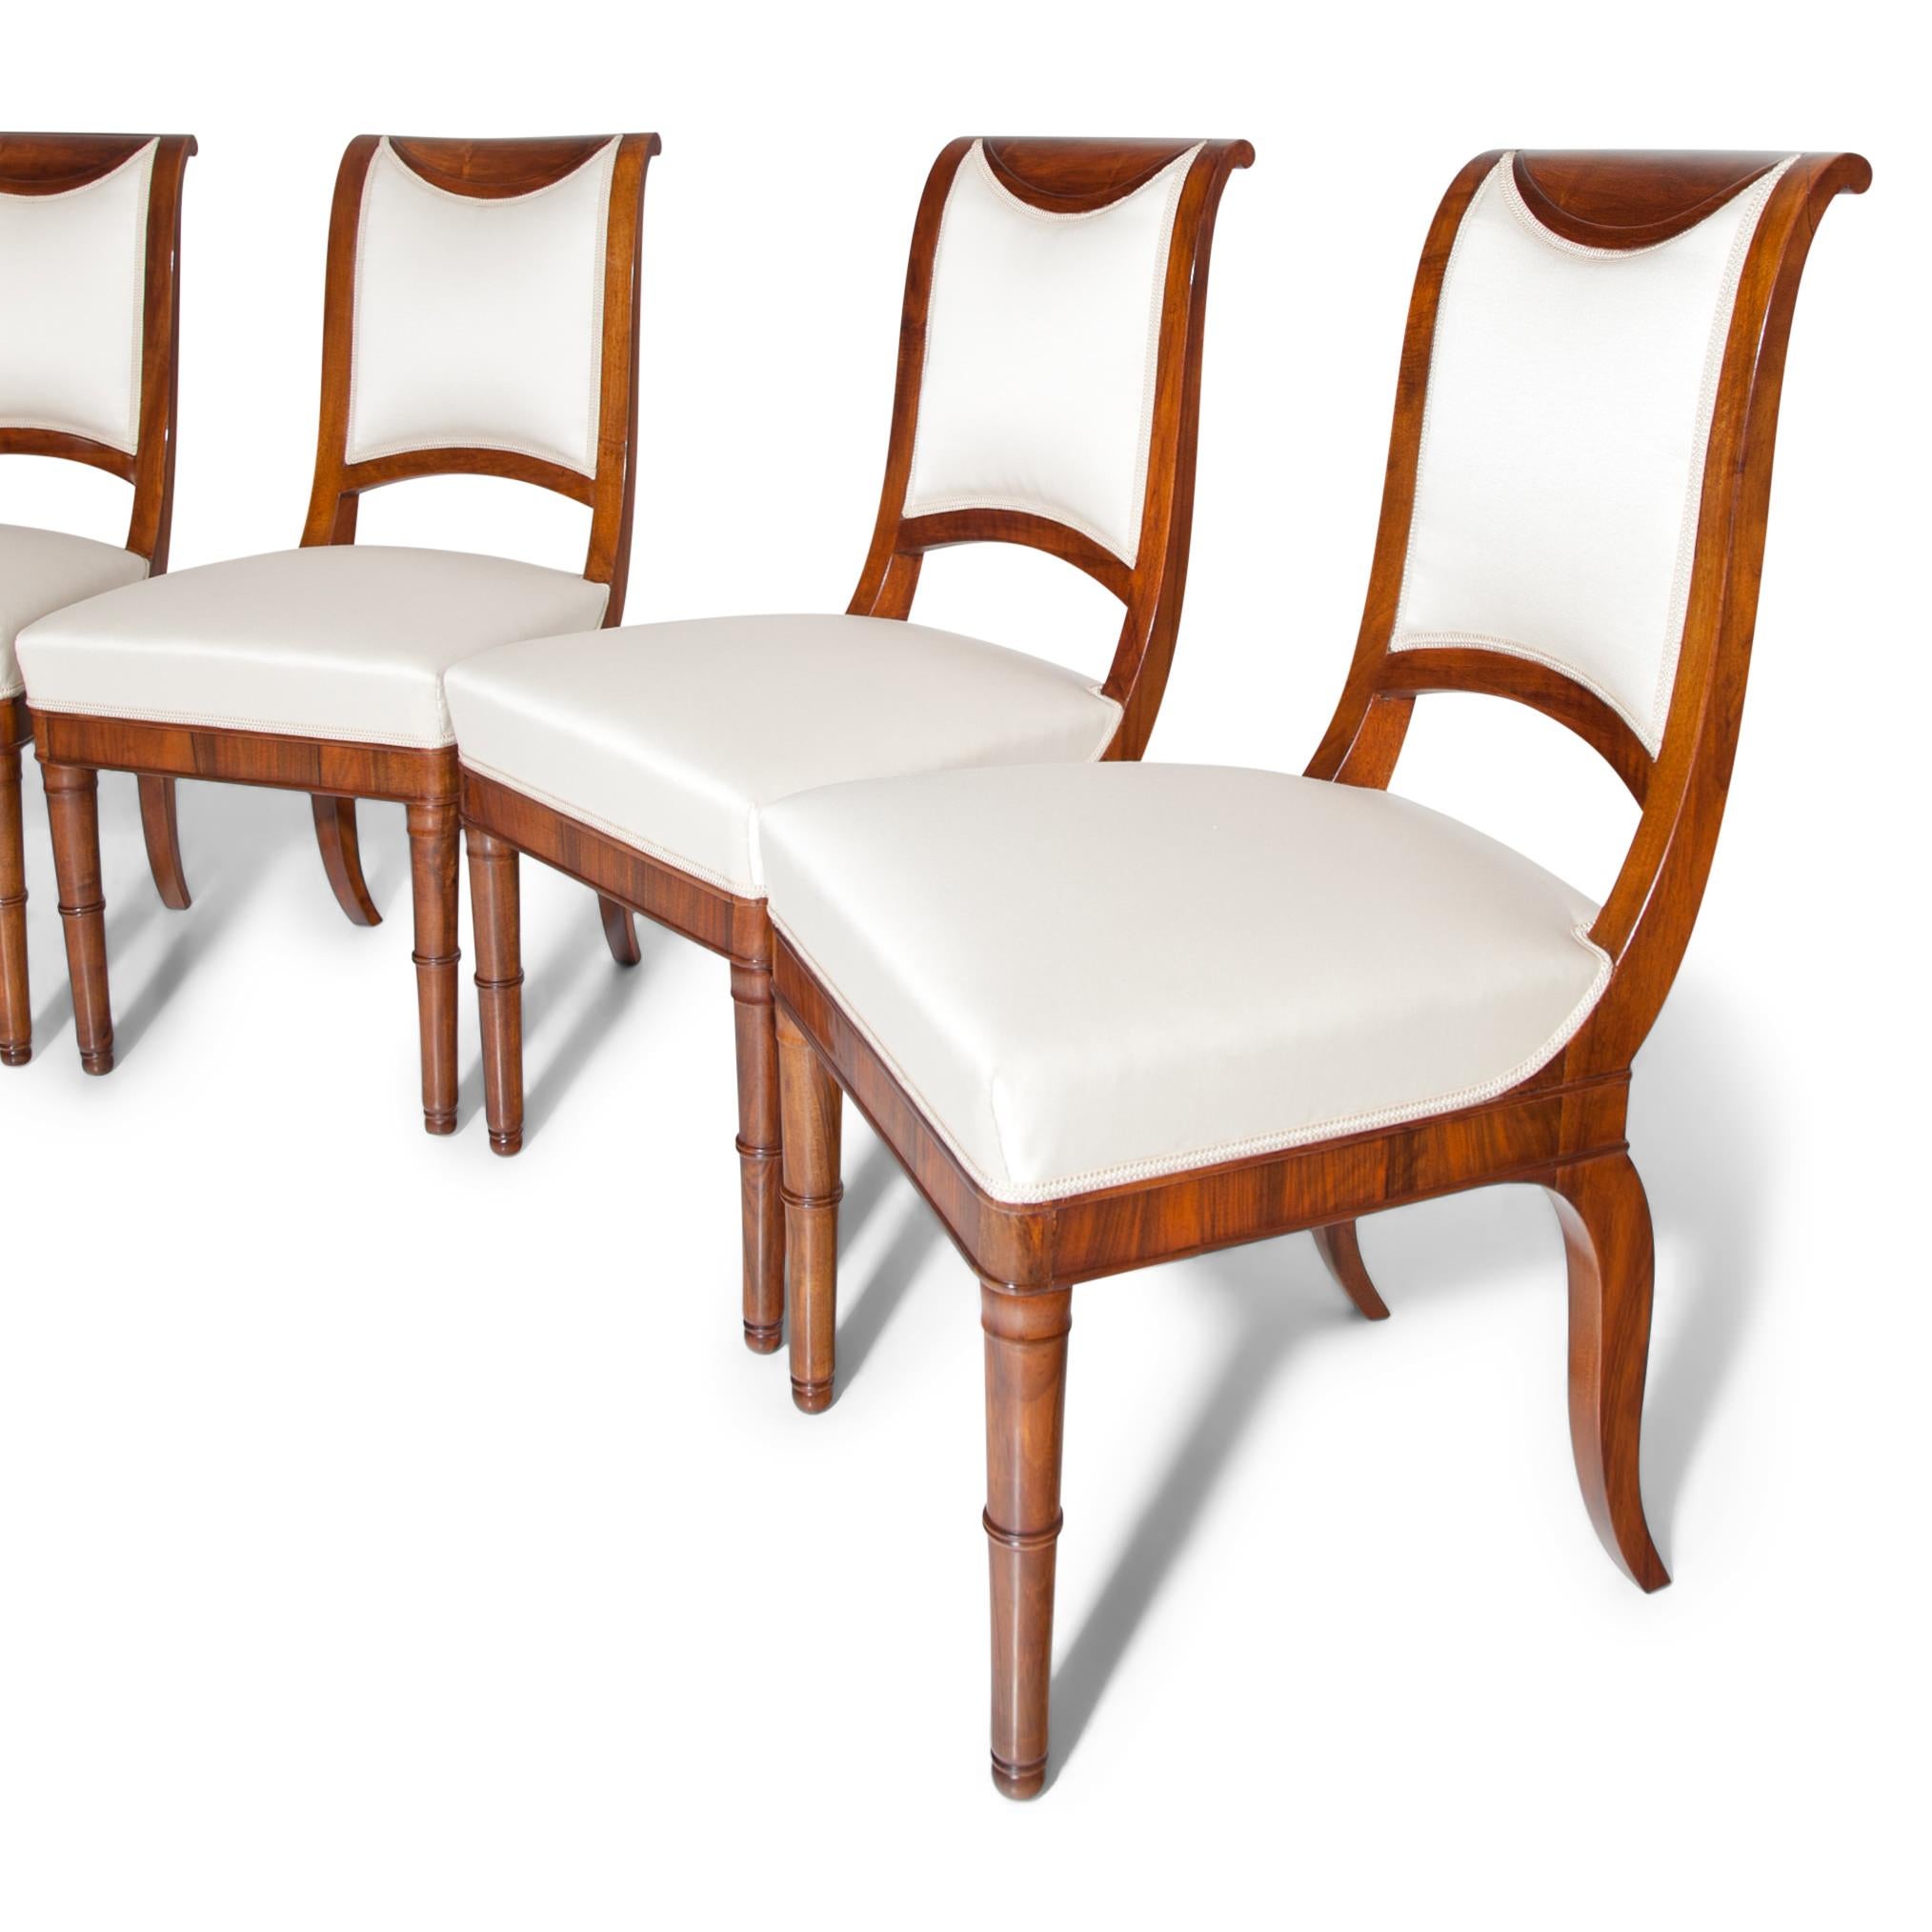 Four French Directoire walnut chairs with a cushioned S-shaped backrest and a trapezoidal seat, standing on conical feet in the front and saber legs in the rear. The chairs were professionally refurbished and reupholstered with a high quality beige